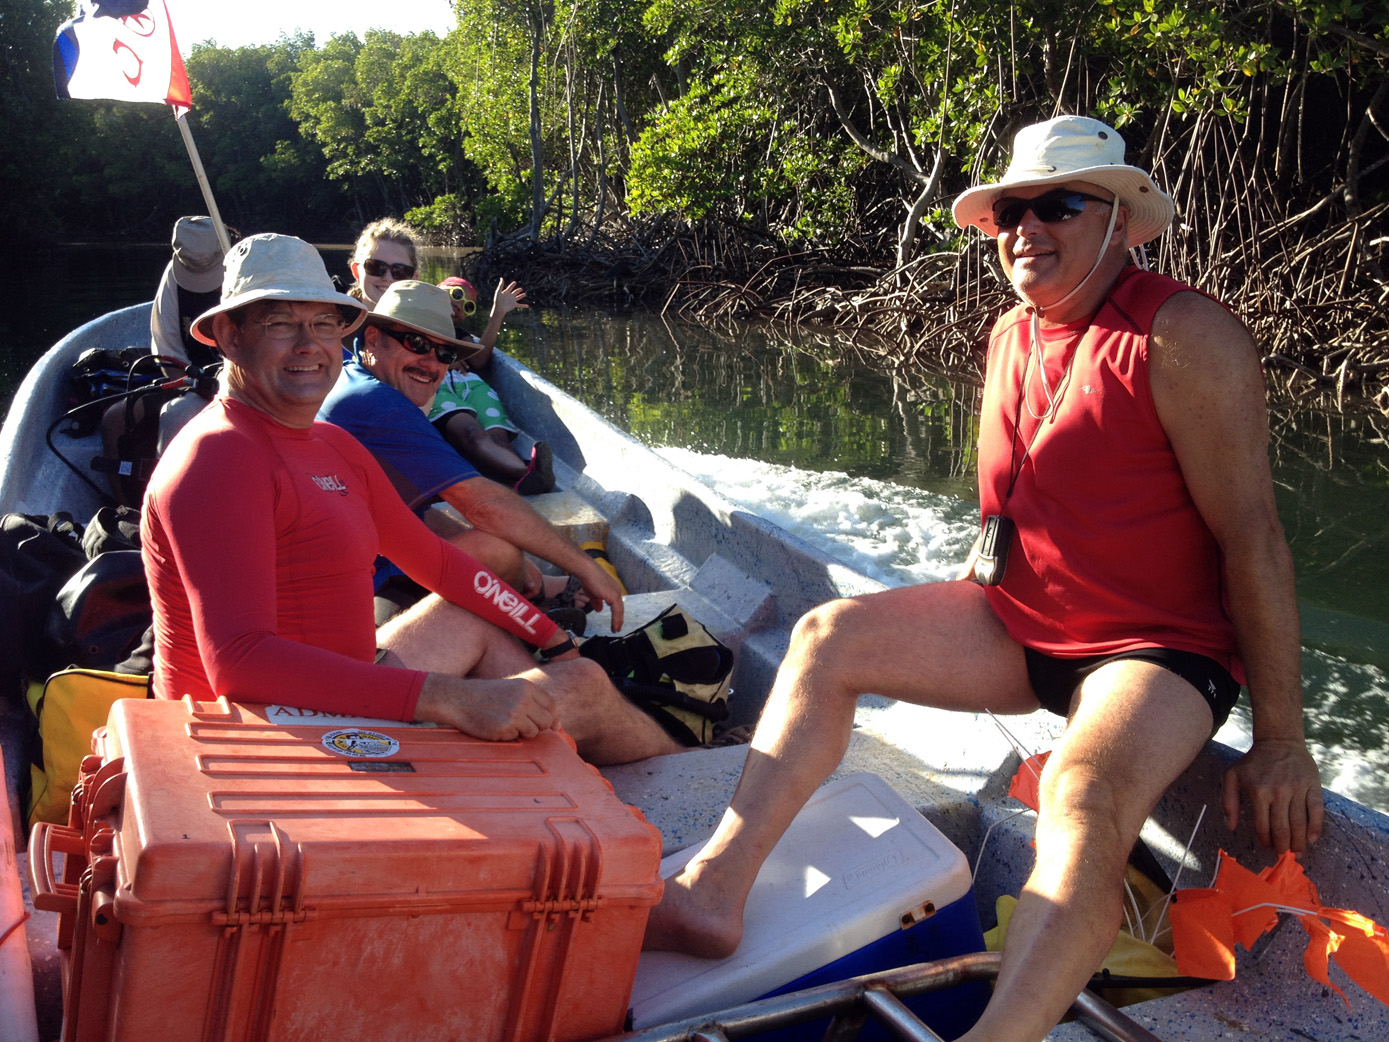  Dr Spooner, Christine O' Sullivan (under the hat),&nbsp; Nikki Bose, John Downing, Ruth Pion, and Raimund Krob on the way to   Le Casimir   wreck site in 2014  